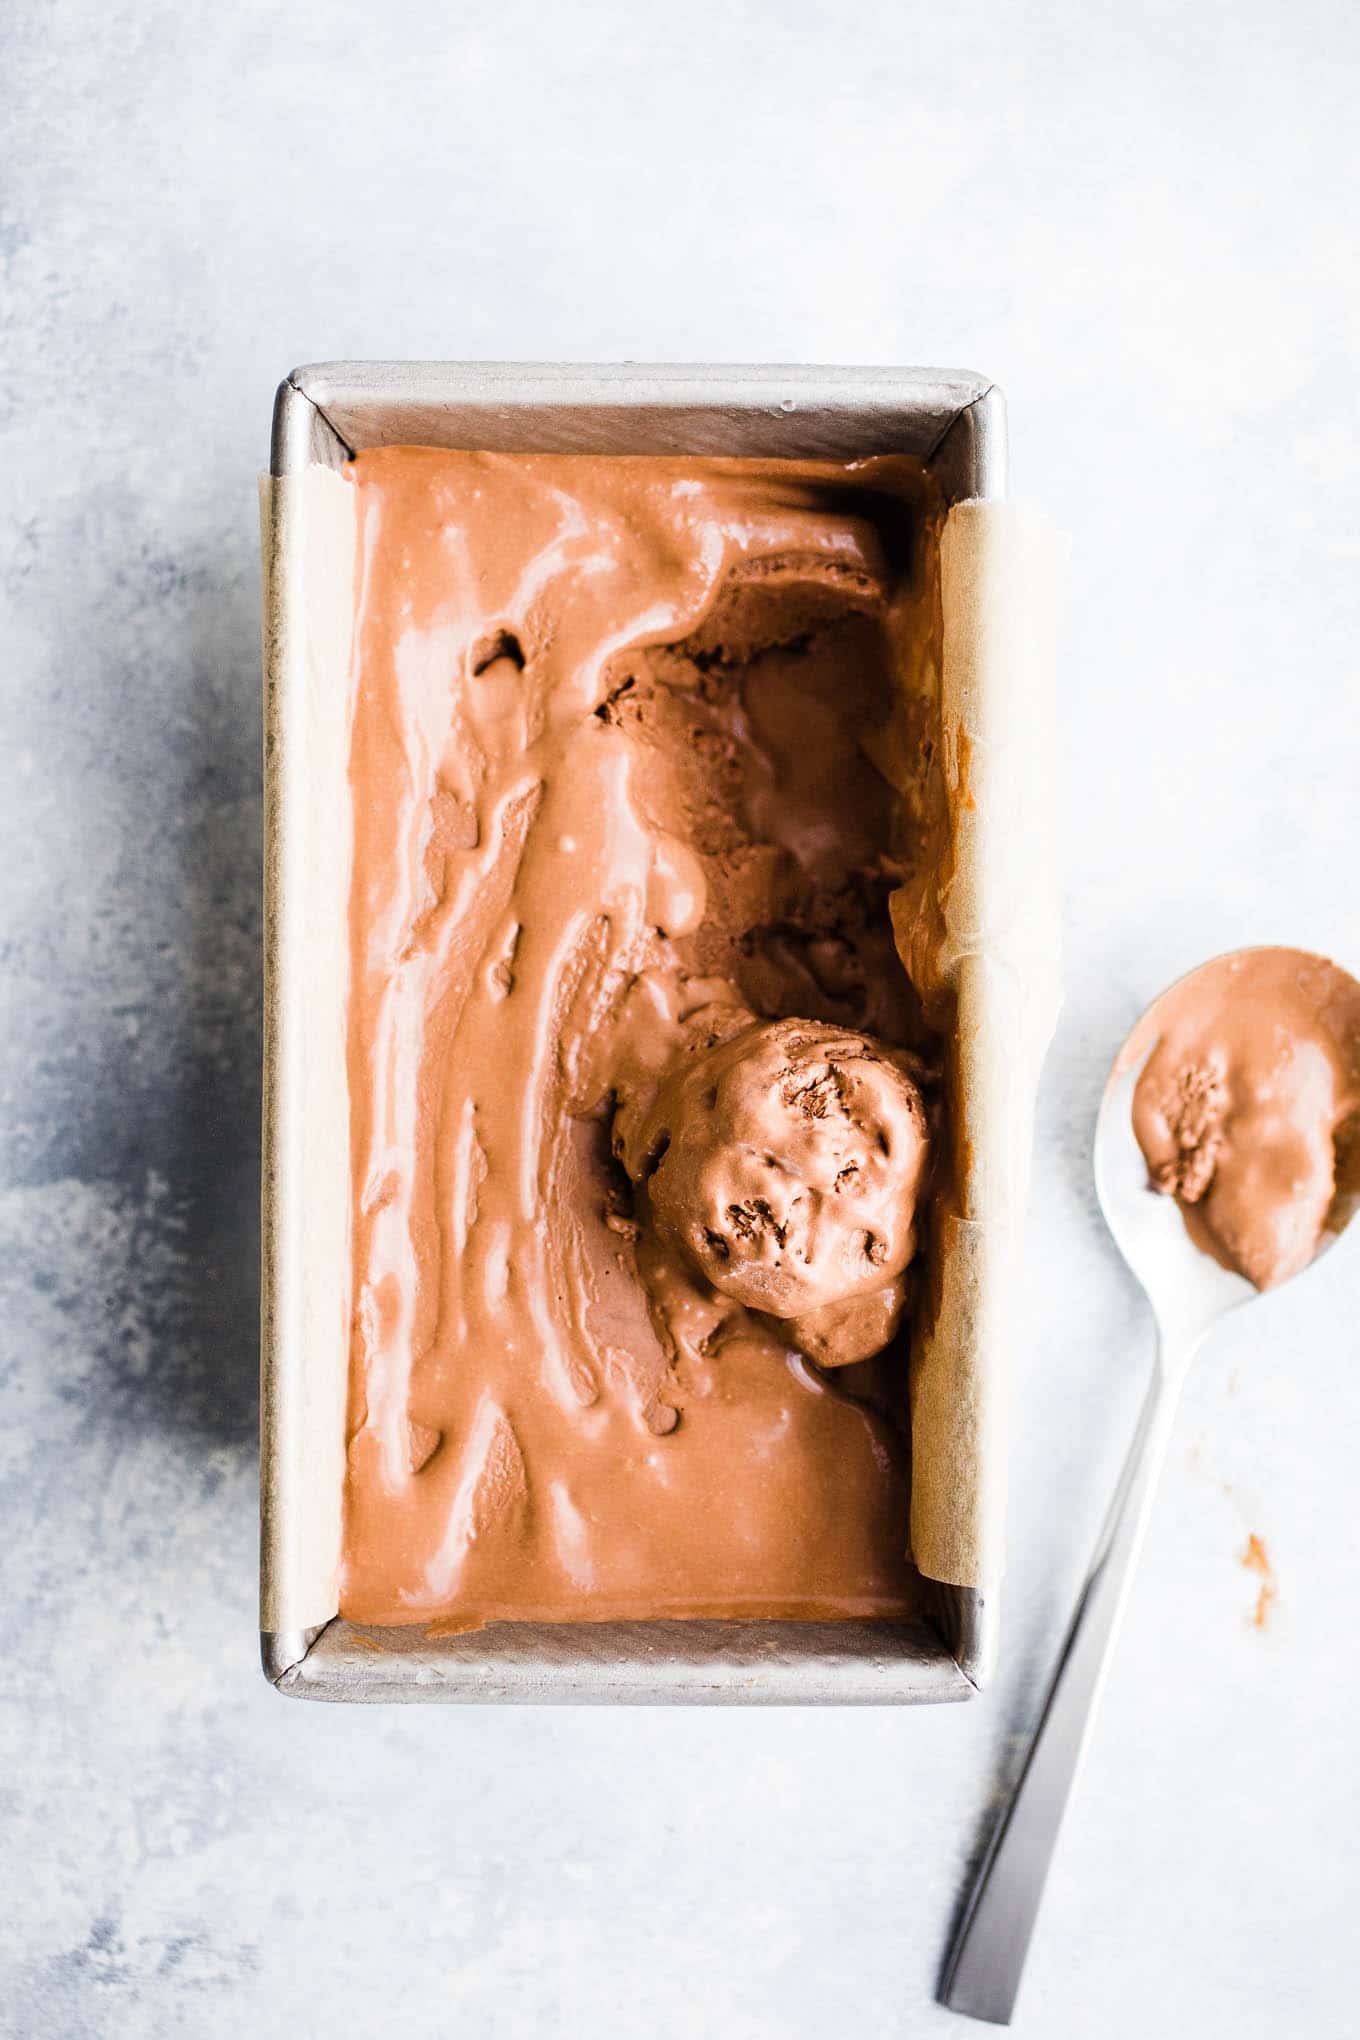 Chocolate ice cream in a loaf pan.